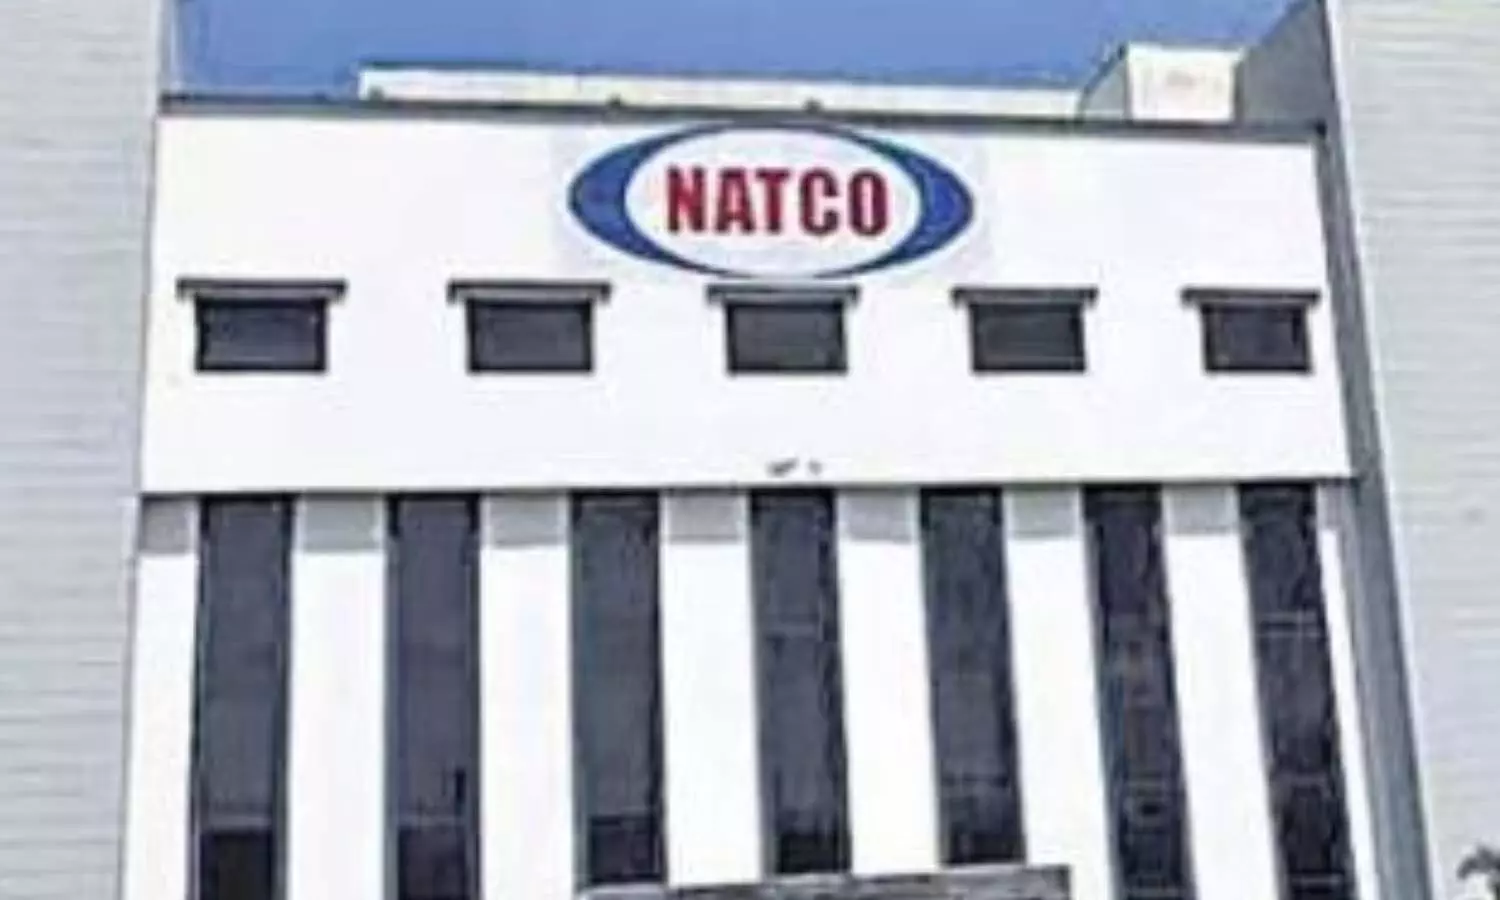 Natco Pharma to set up subsidiary in Indonesia with investment of Rs 25 crore